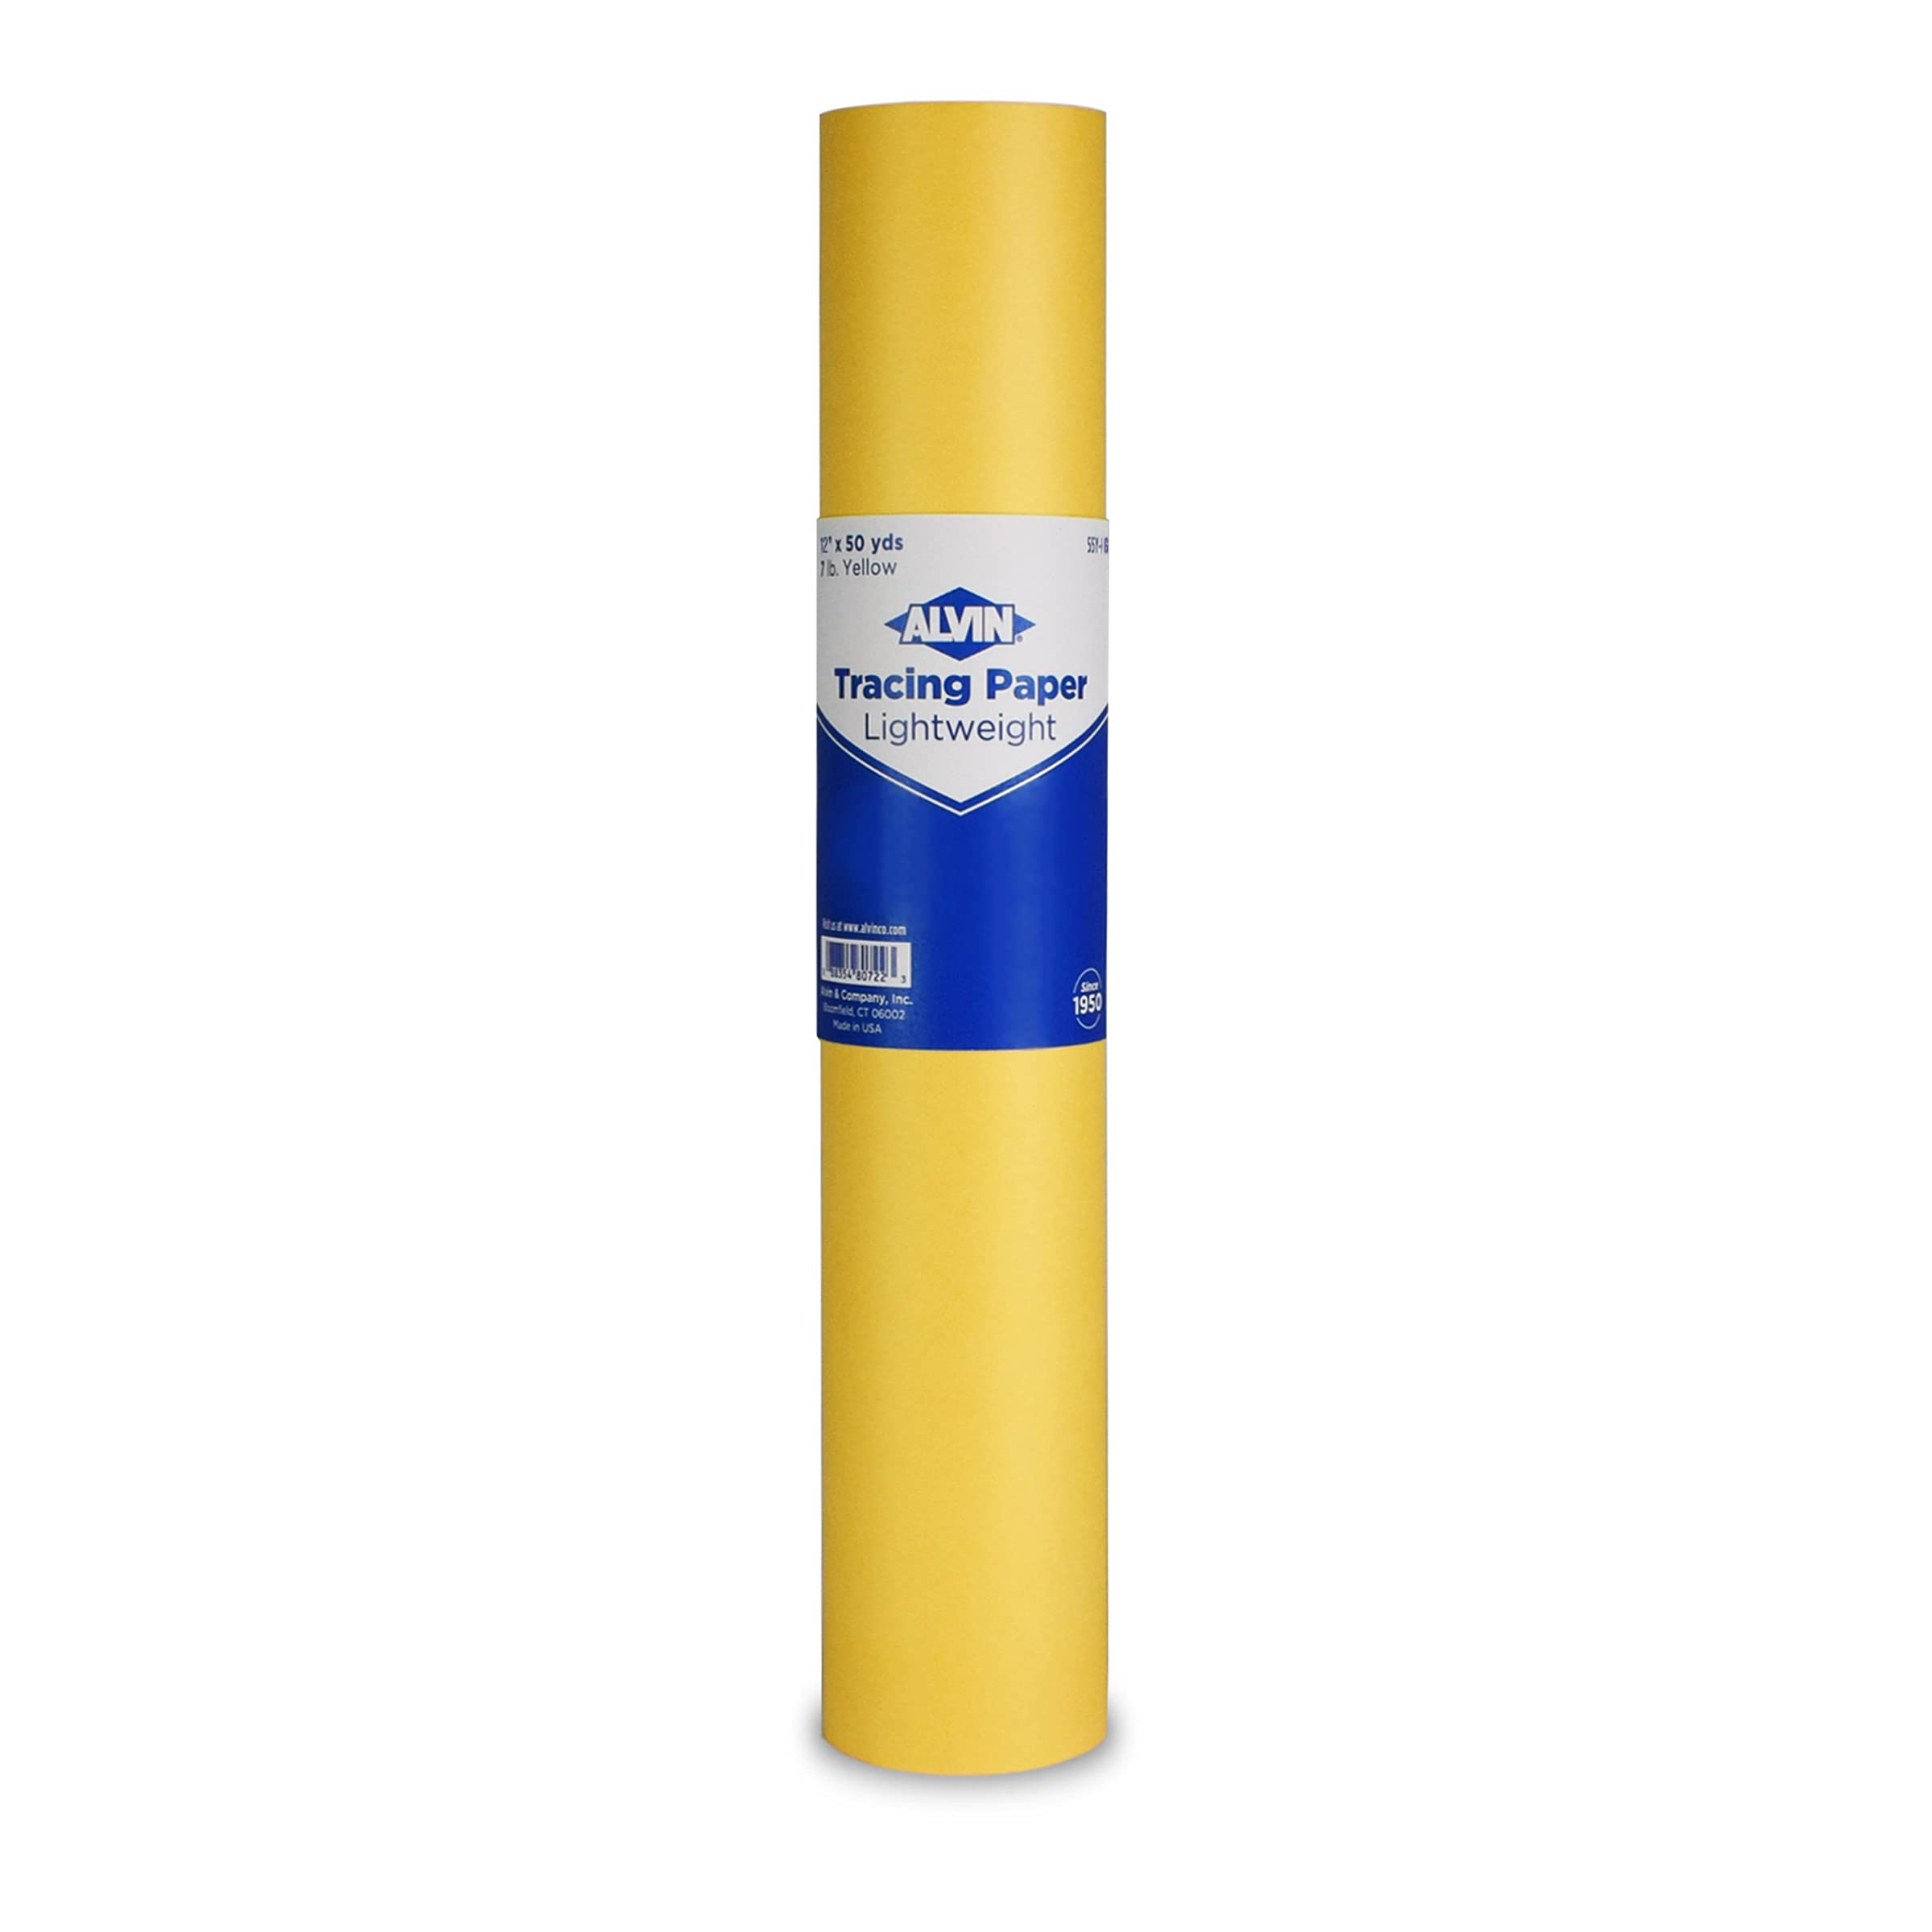 ALVIN 55Y-G Lightweight Tracing Paper Roll, Yellow, Suitable with Ink,  Charcoal, Felt Tip Pen, for Sketching or Detailing - 12 inches x 50 Yards,  1-inch Core 12